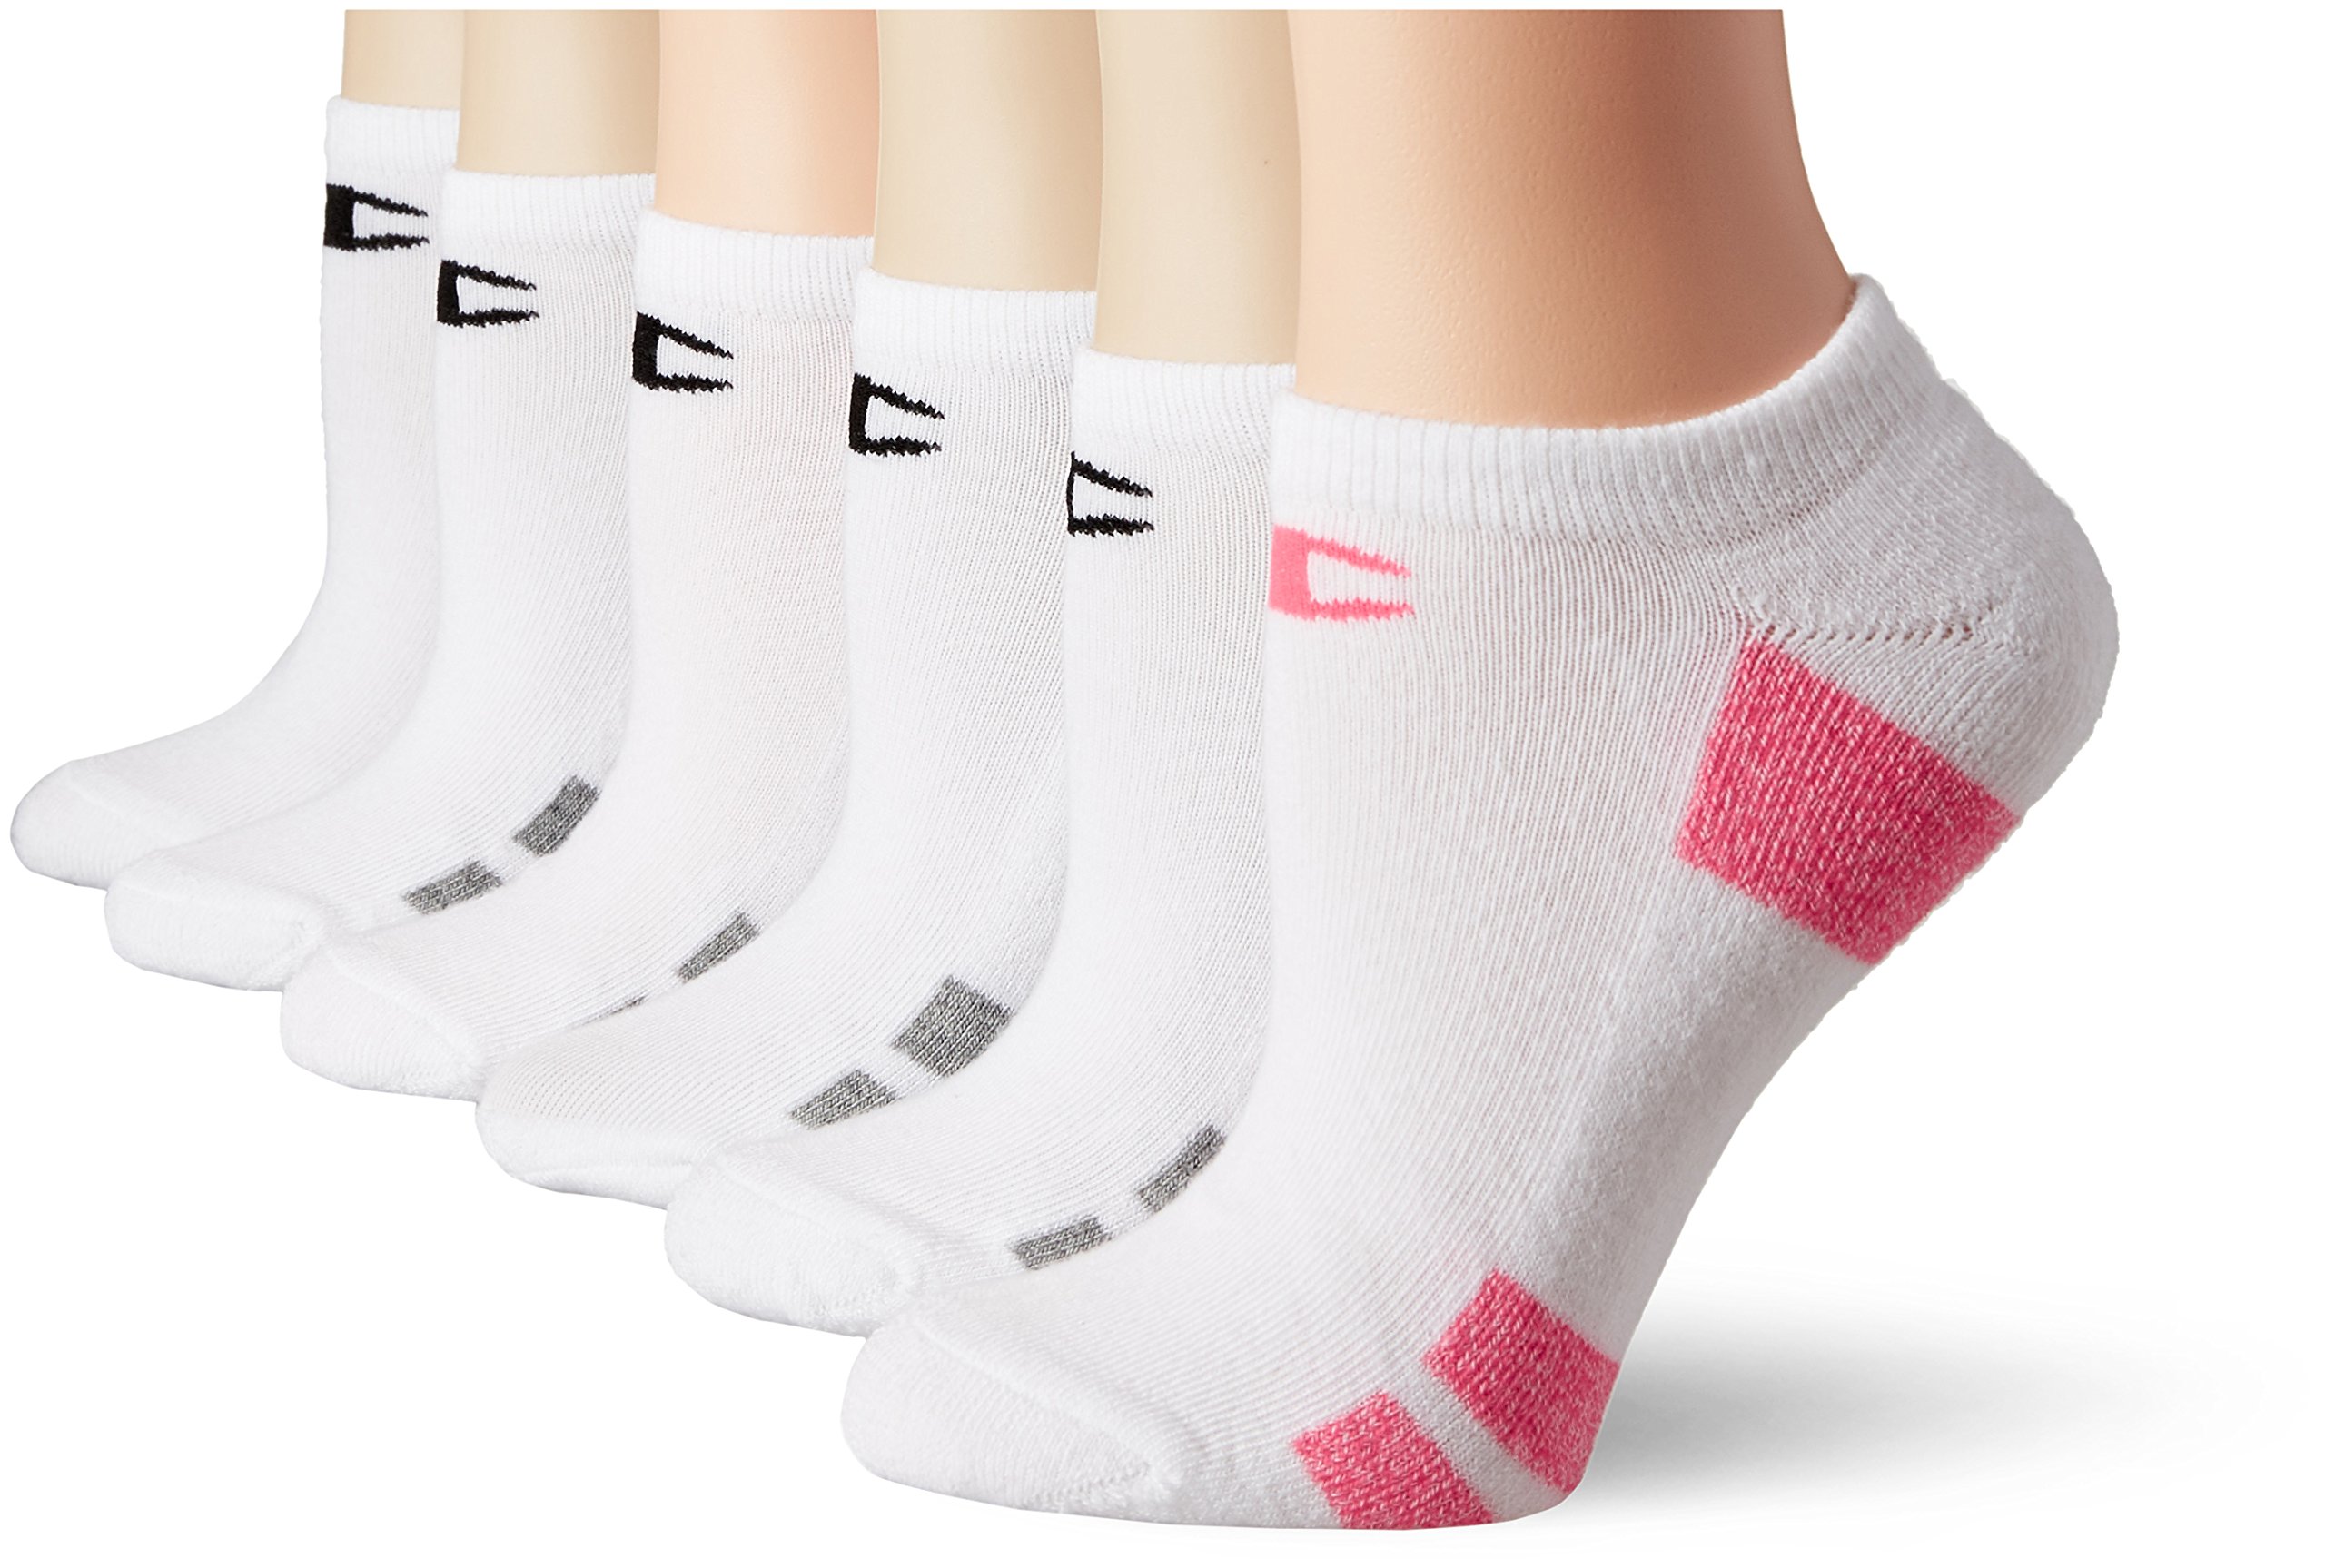 Champion Women's No Show Performance Socks, 6 and 12-Pair Packs Available, White/Assorted, 5/9 $7.01